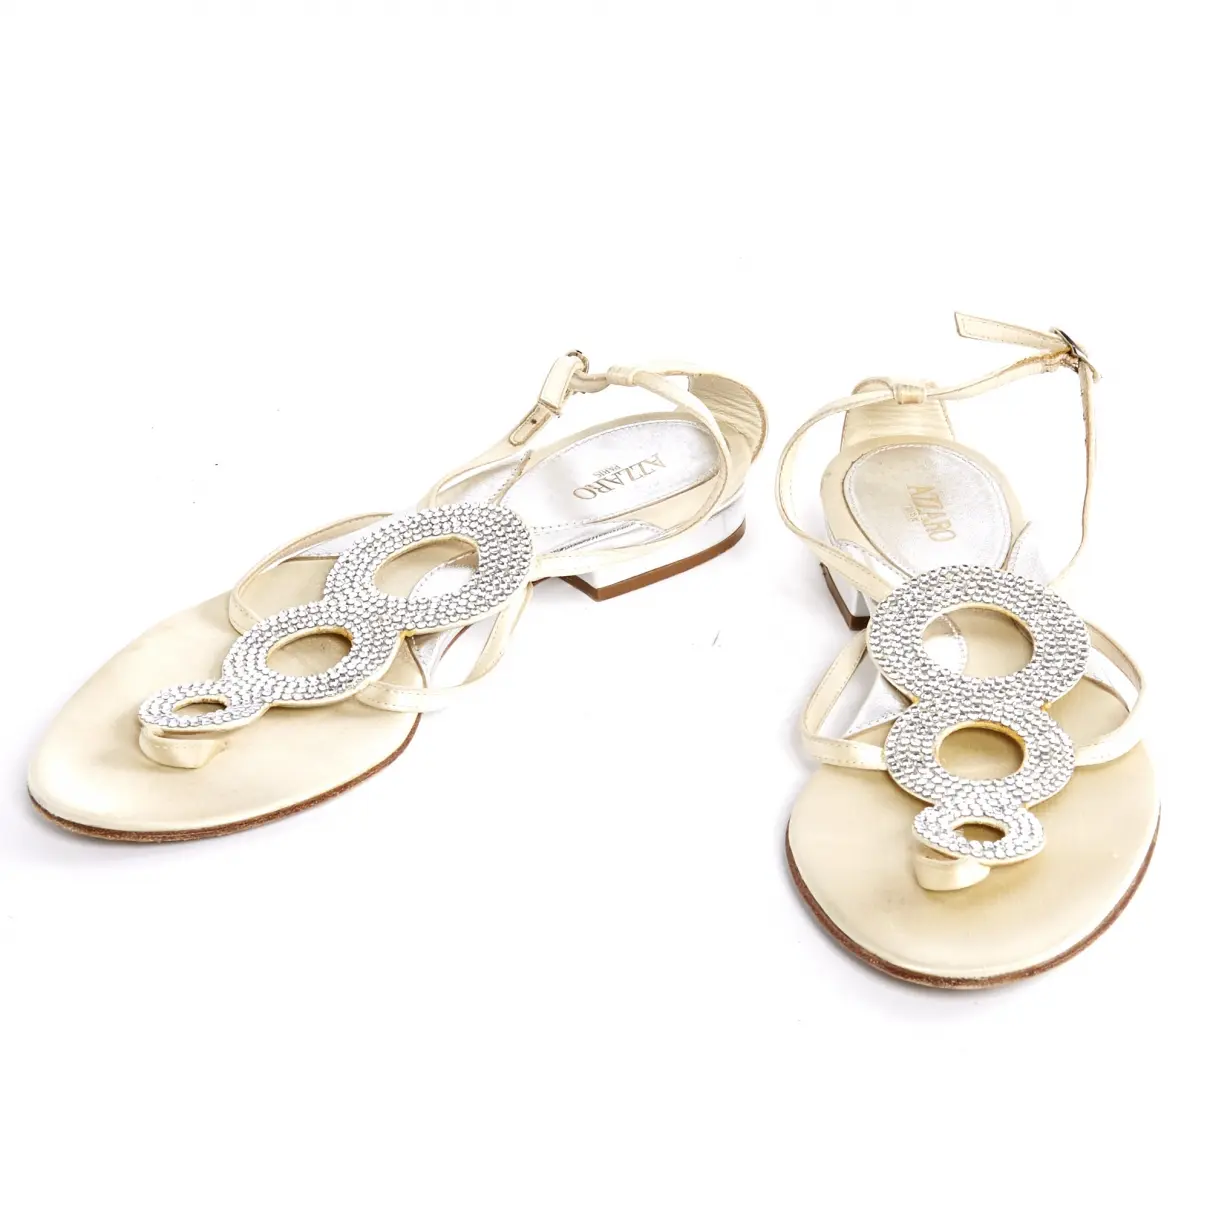 Azzaro Cloth sandals for sale